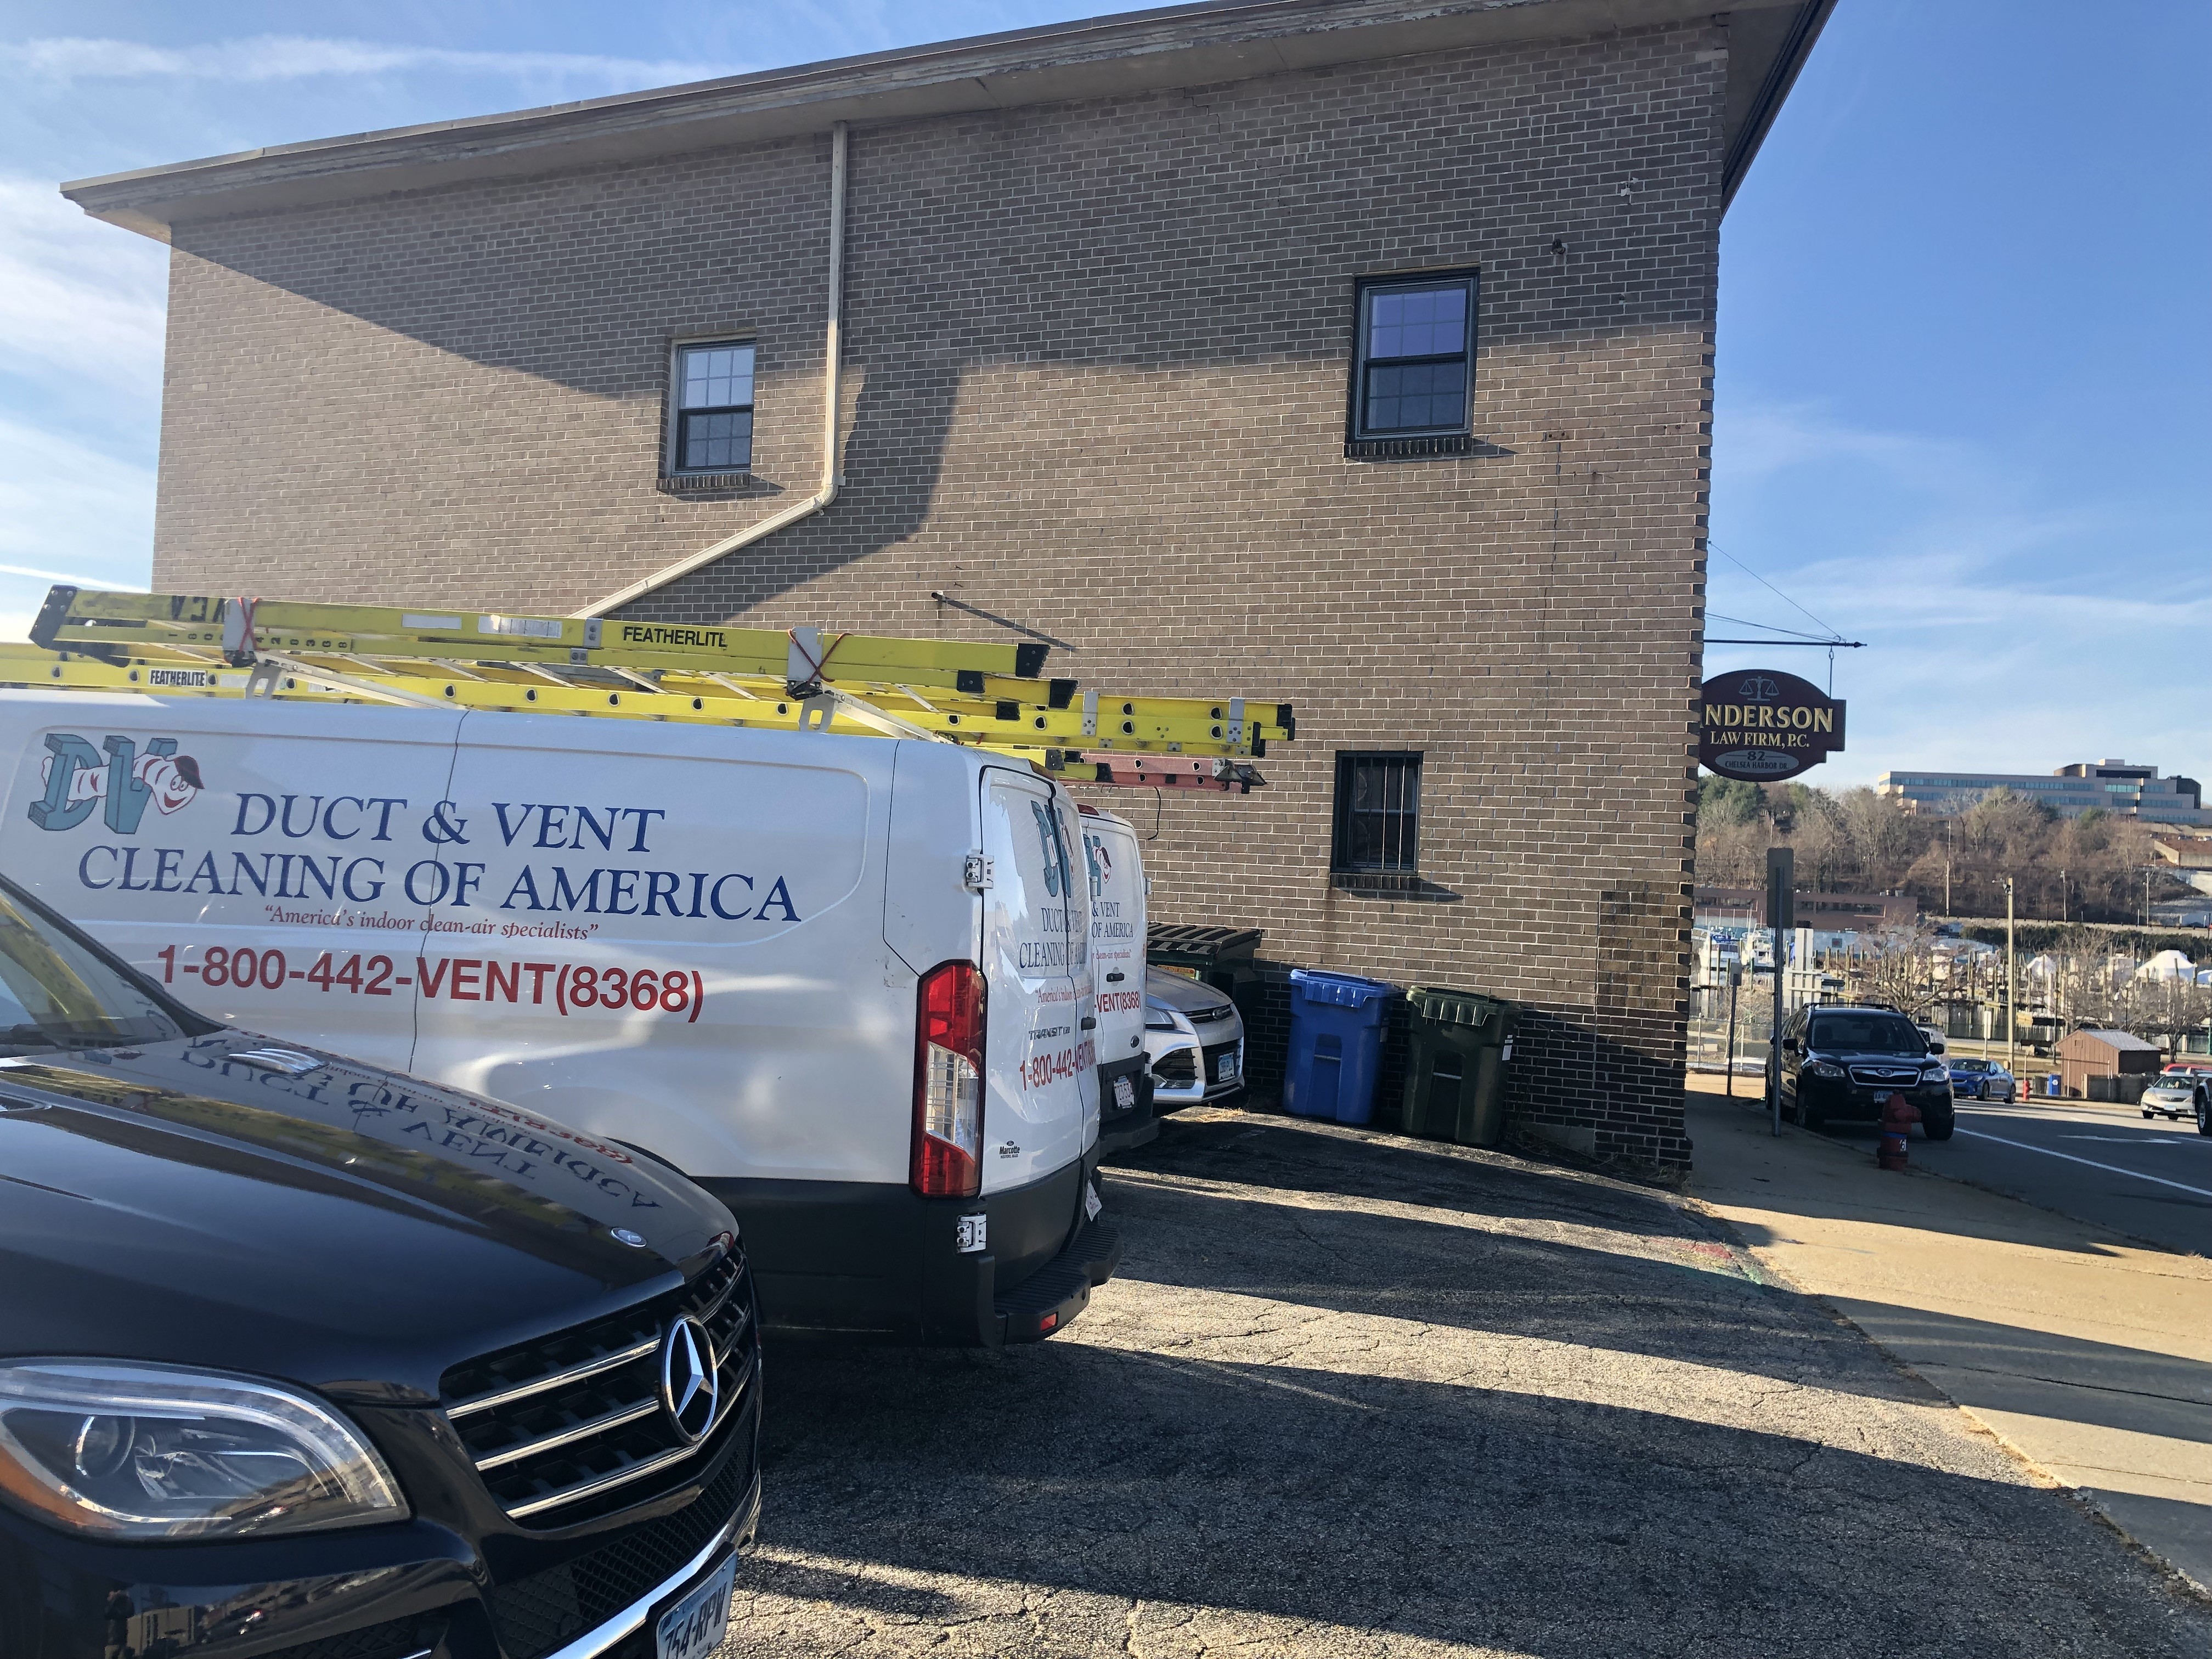 Anderson Law Firm - Duct Cleaning - Norwich, CT Anderson-Law-Firm.jpg